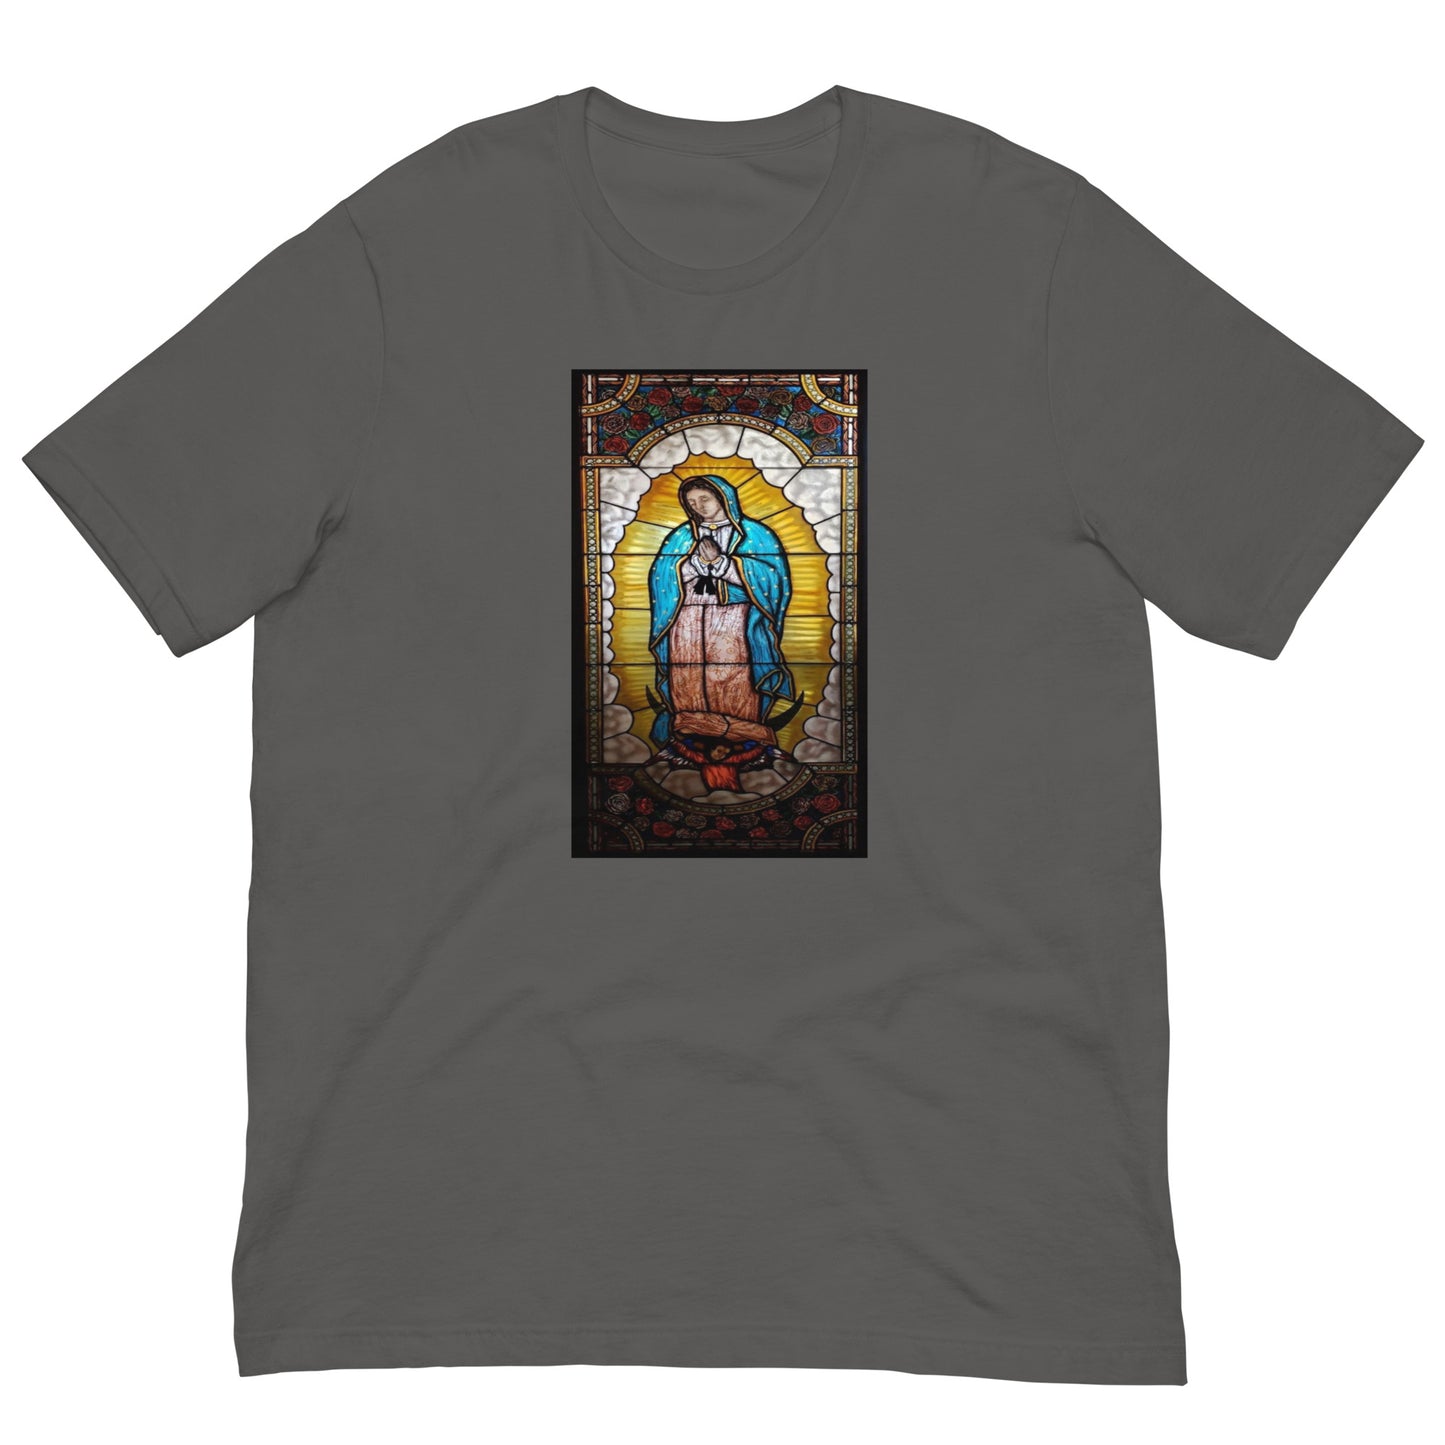 Our Lady of Guadalupe T-shirt